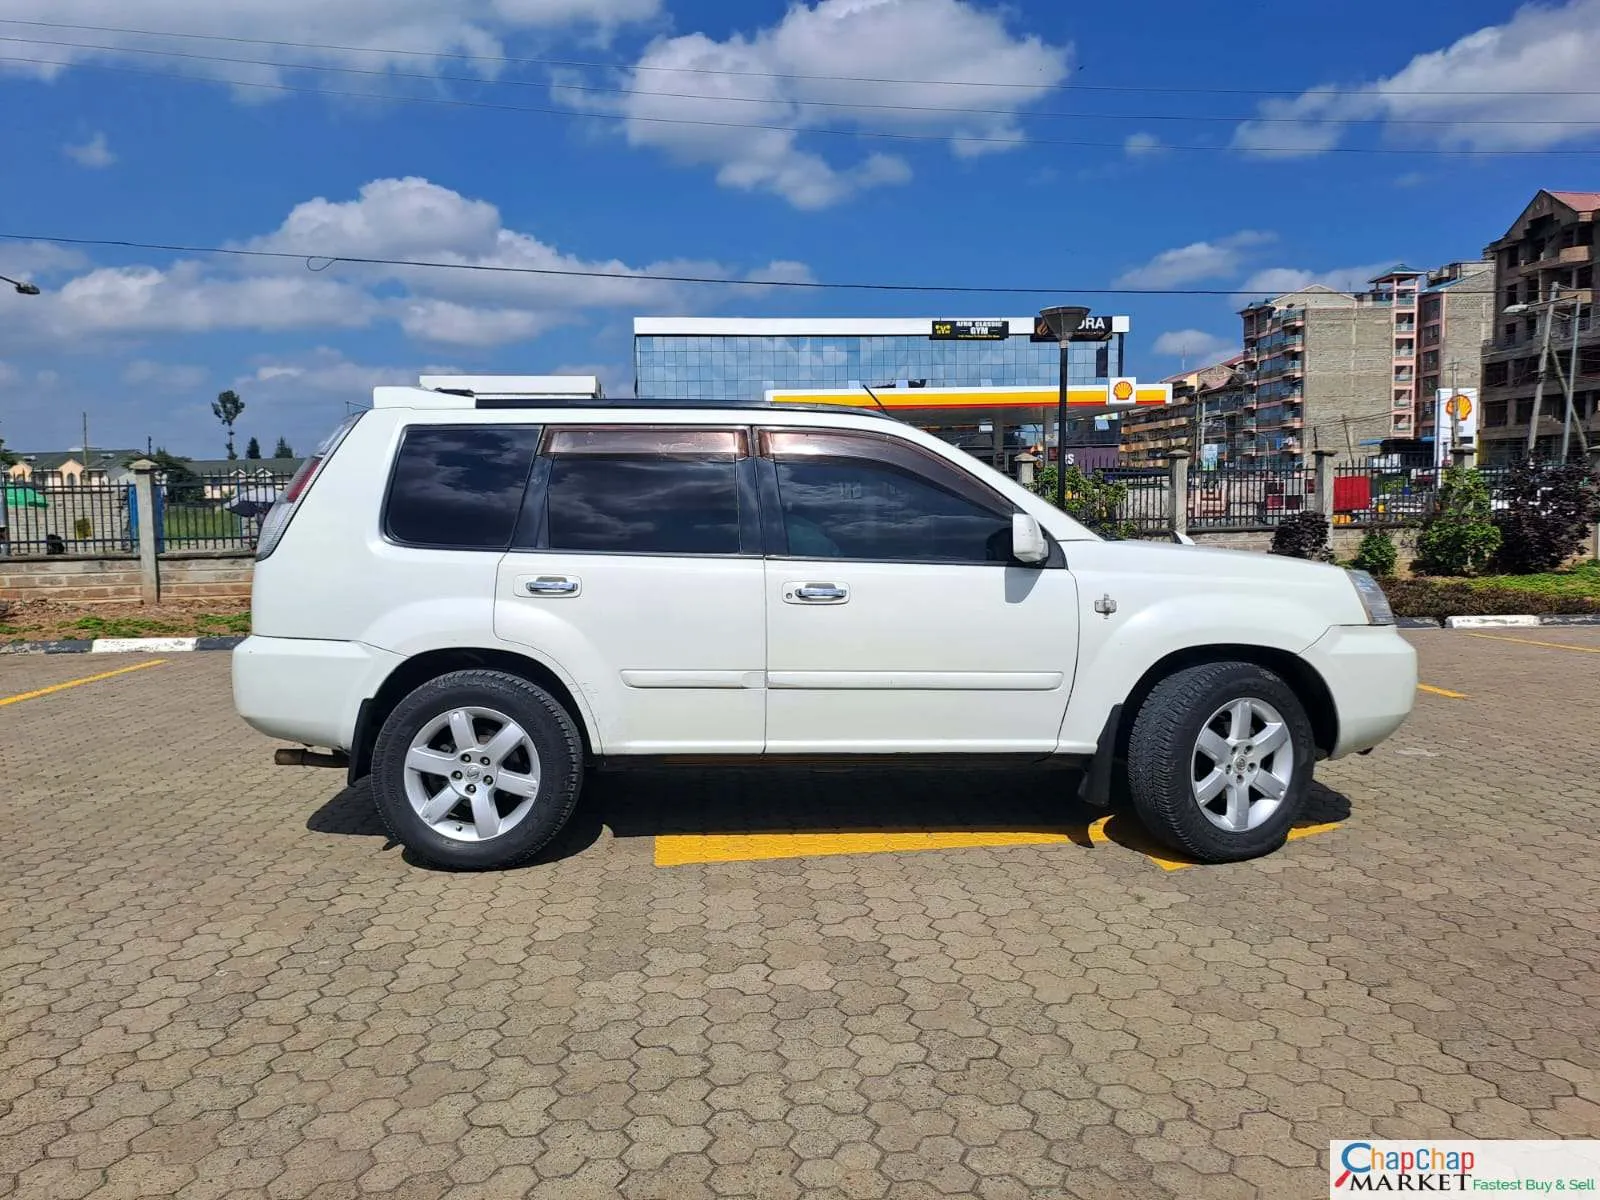 Nissan XTRAIL QUICK SALE You Pay 30% Deposit Trade in Ok HIRE PURCHASE INSTALLMENTS KENYA (SOLD)